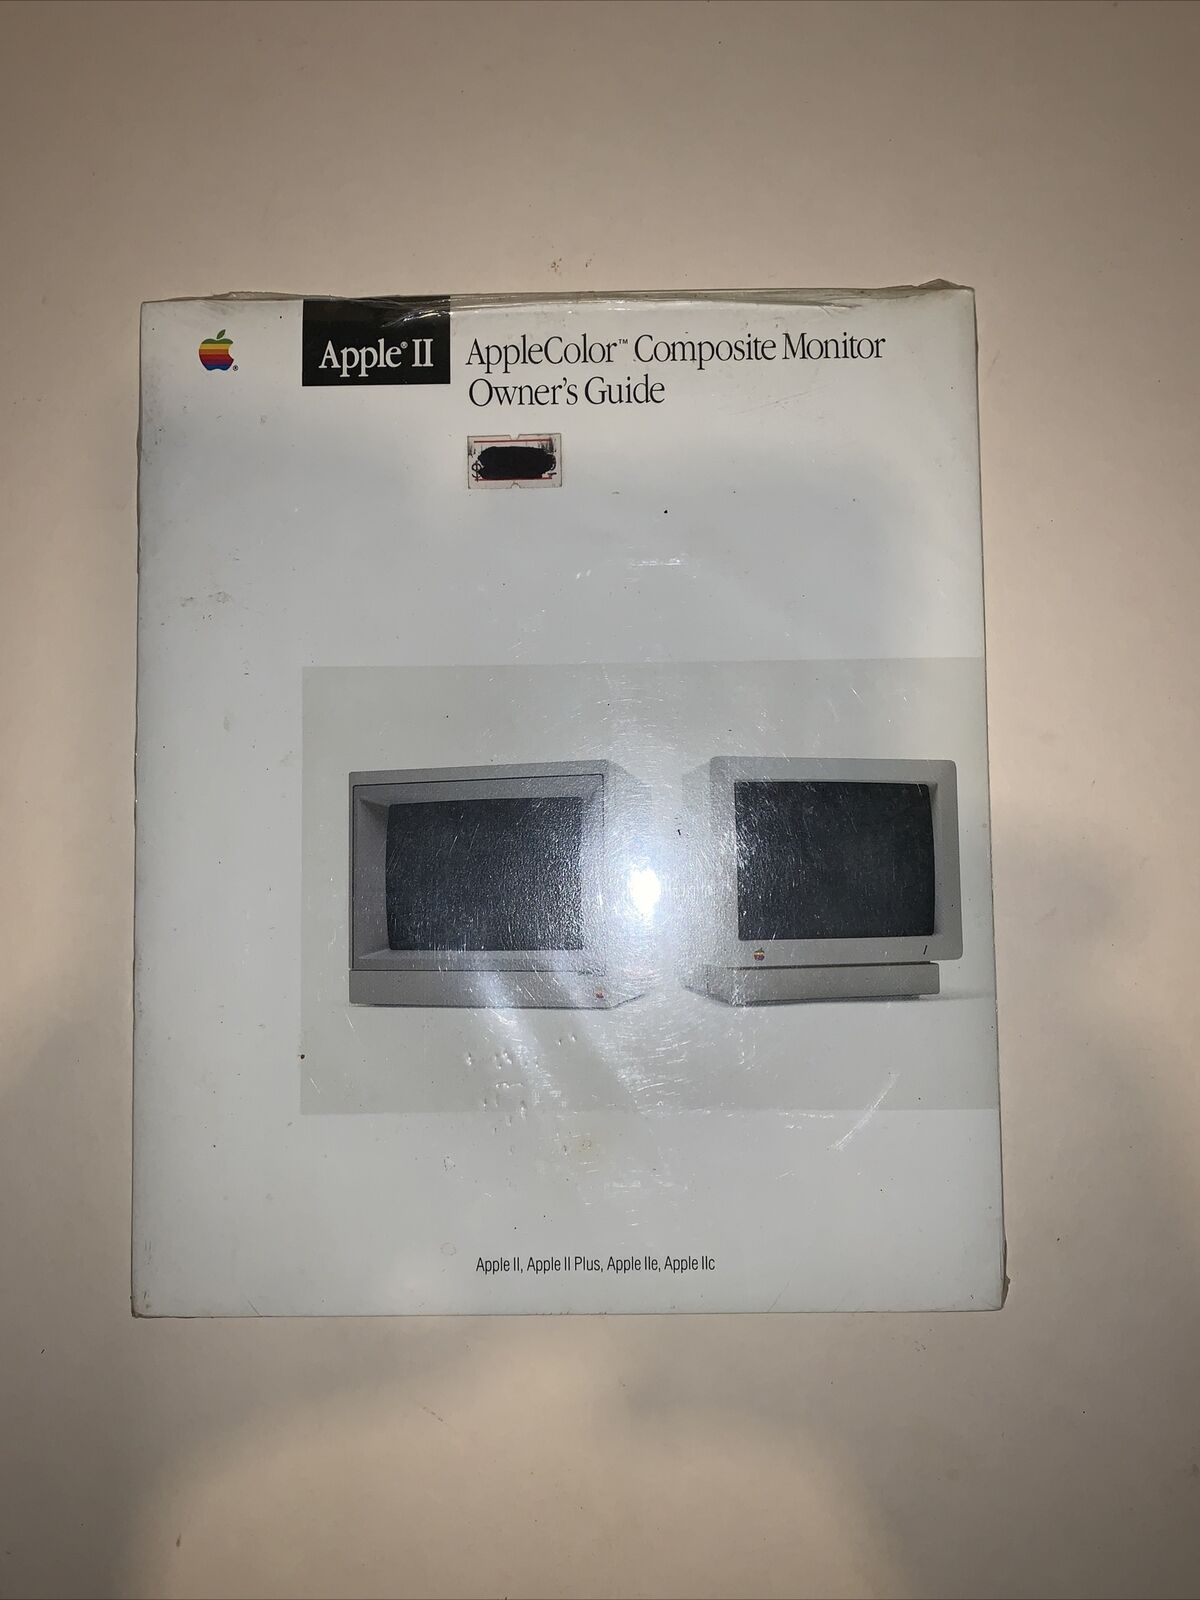 AppleColor Composite Monitor Owner’s Guide manual Apple II IIe vintage computer